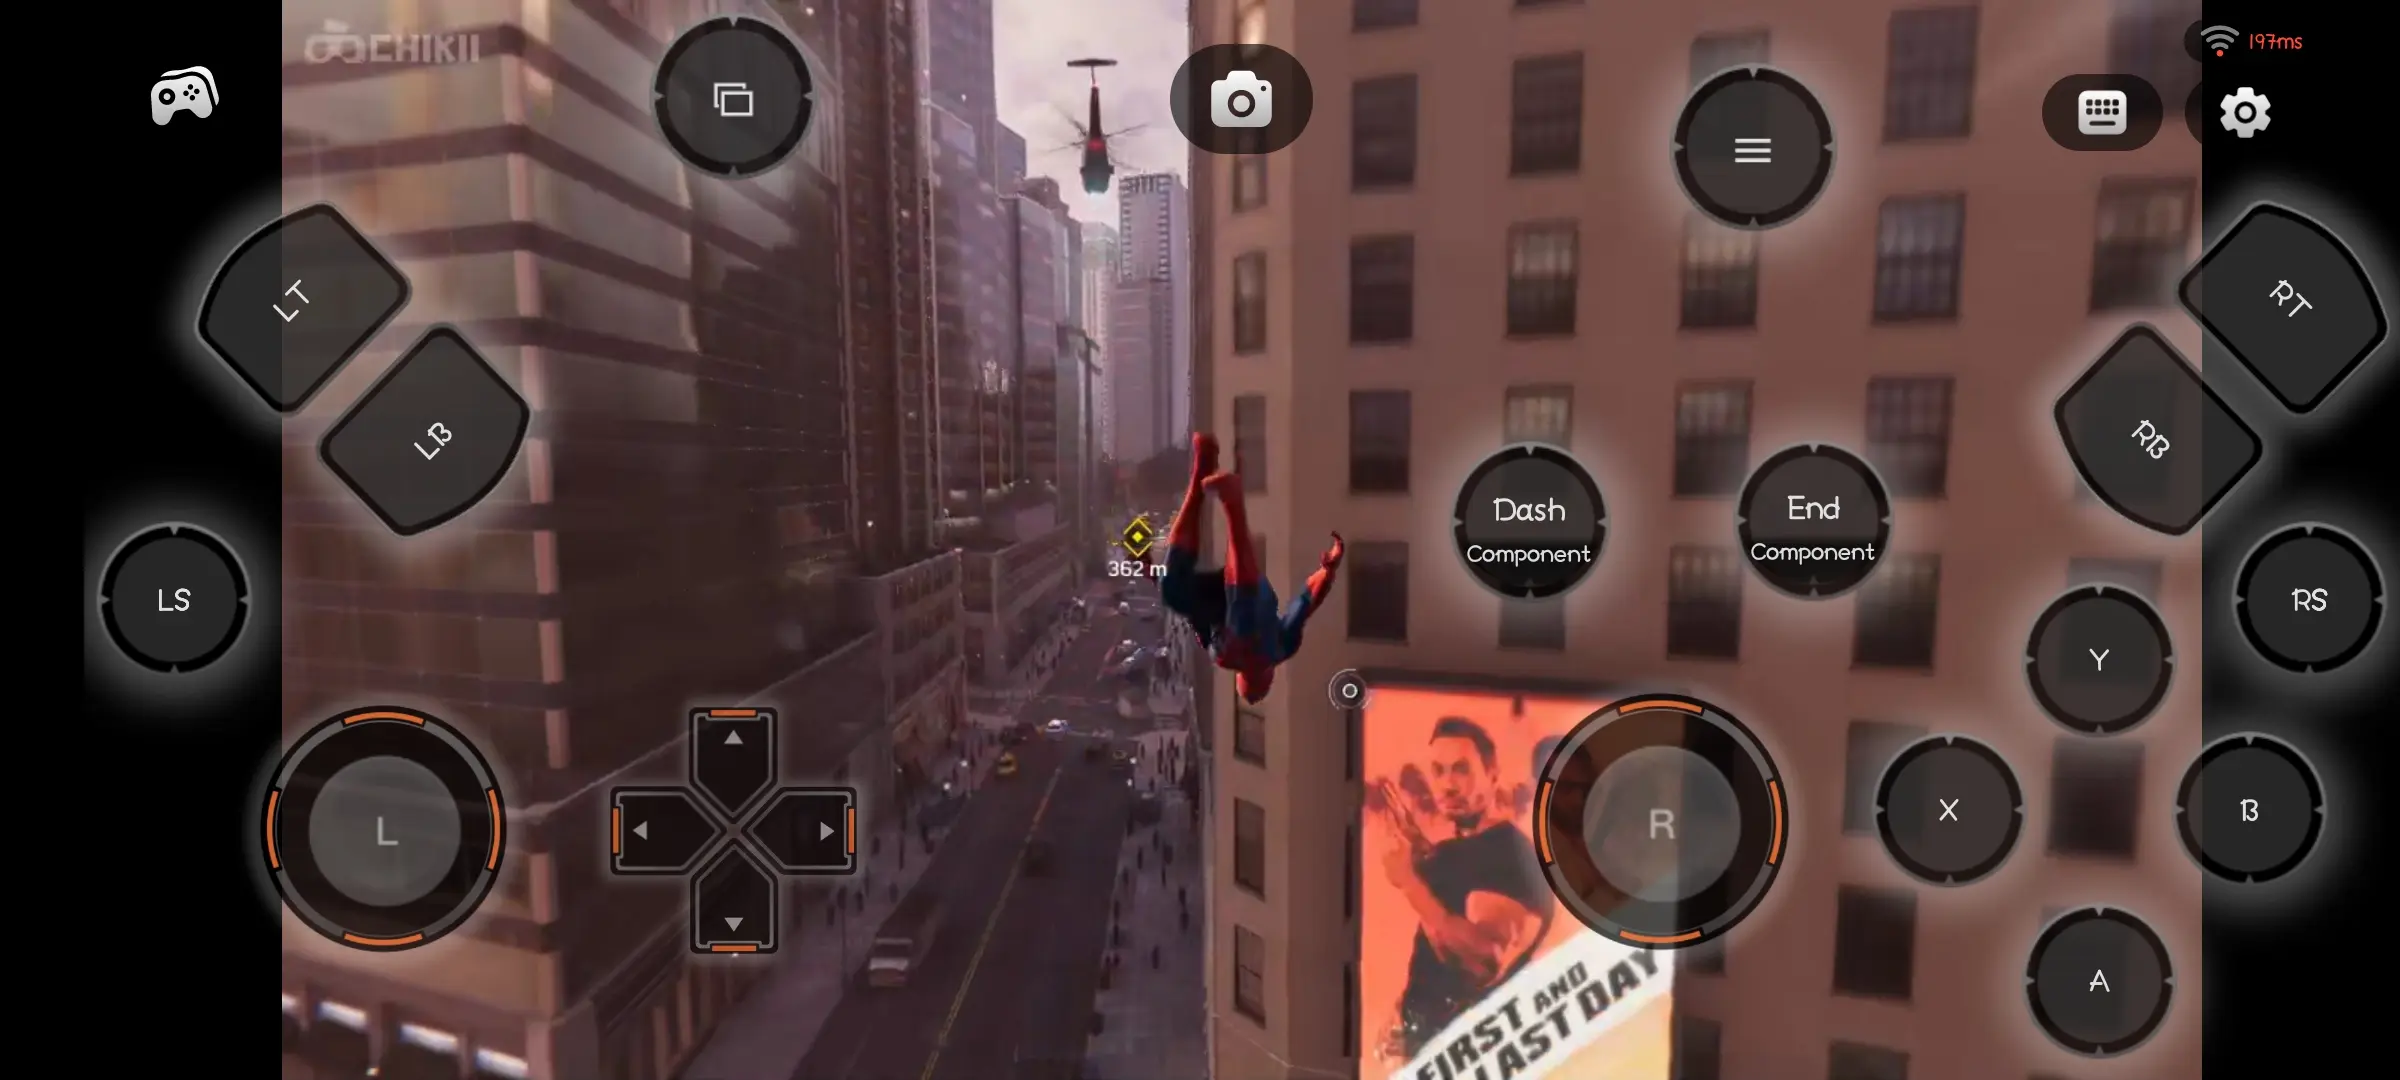 Marvel’s Spider-Man Remastered apk obb android free download - Cloud gaming android app - Chikii